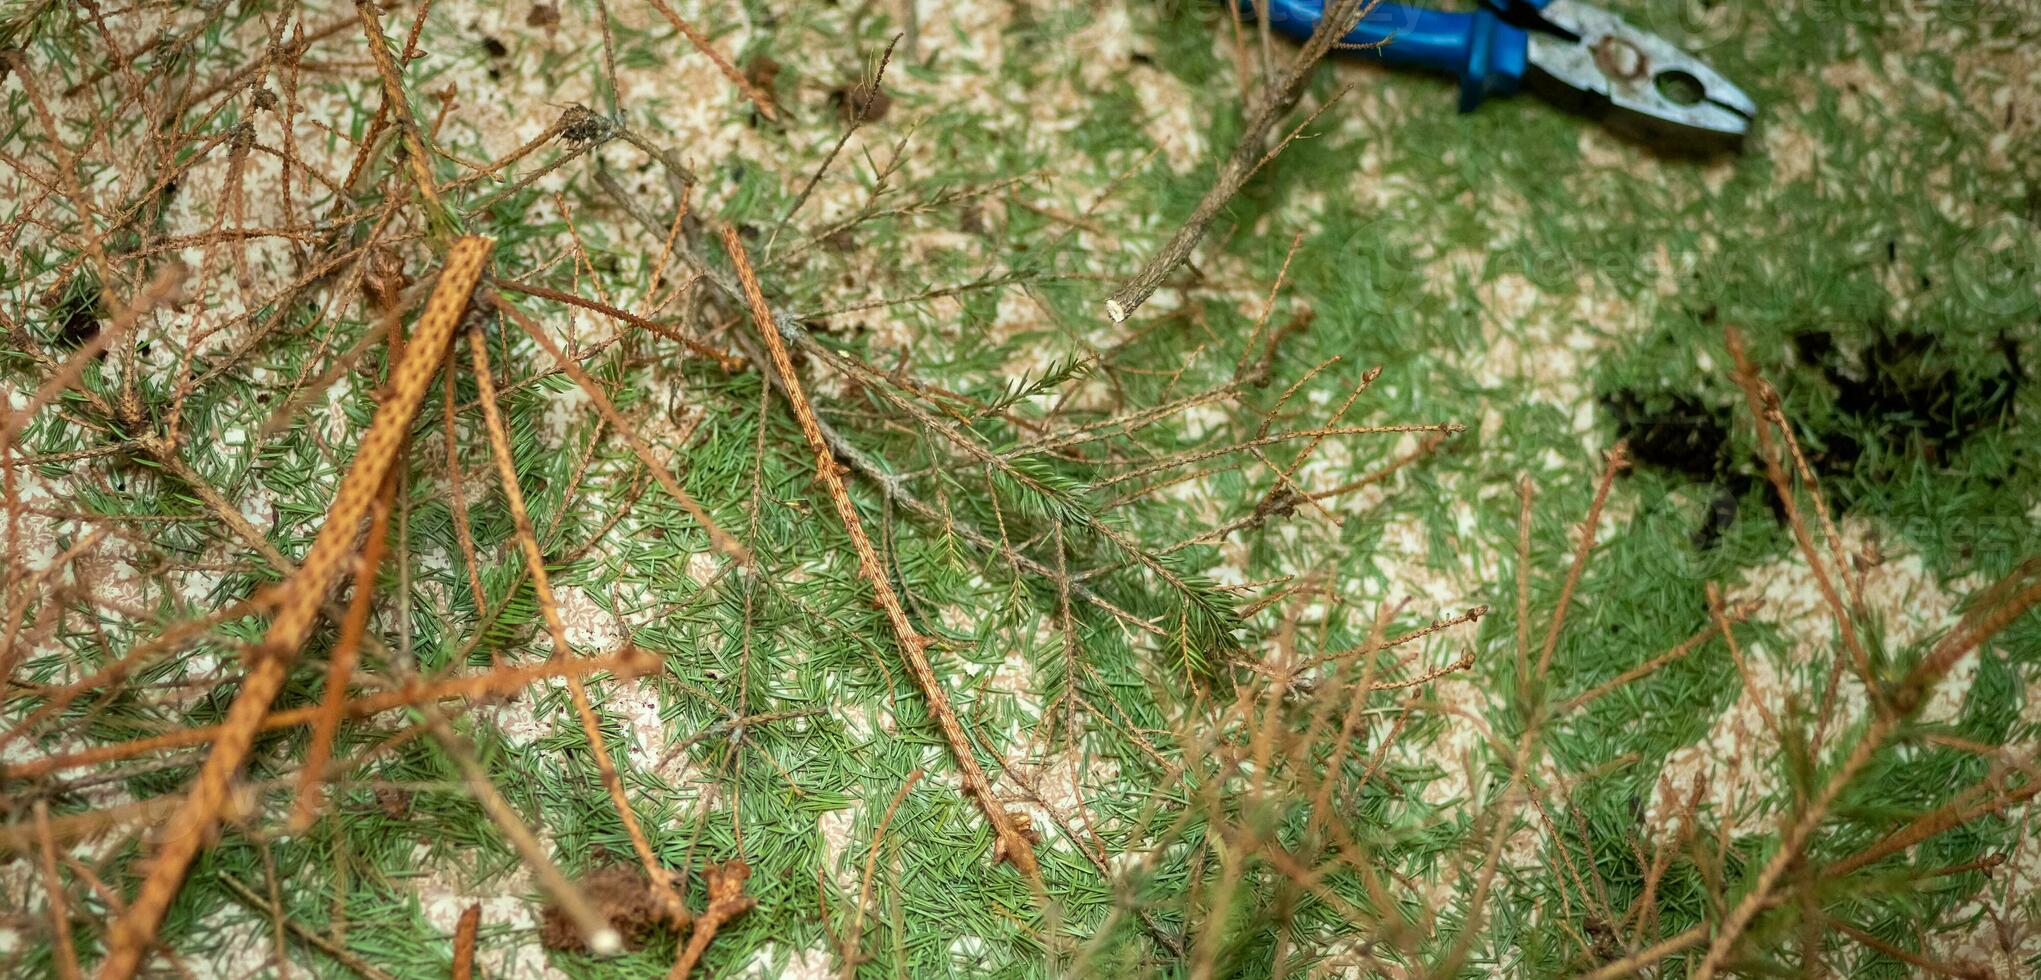 crumbled needles of Christmas tree. An old Christmas tree after holidays. End of the new year and holidays concept photo